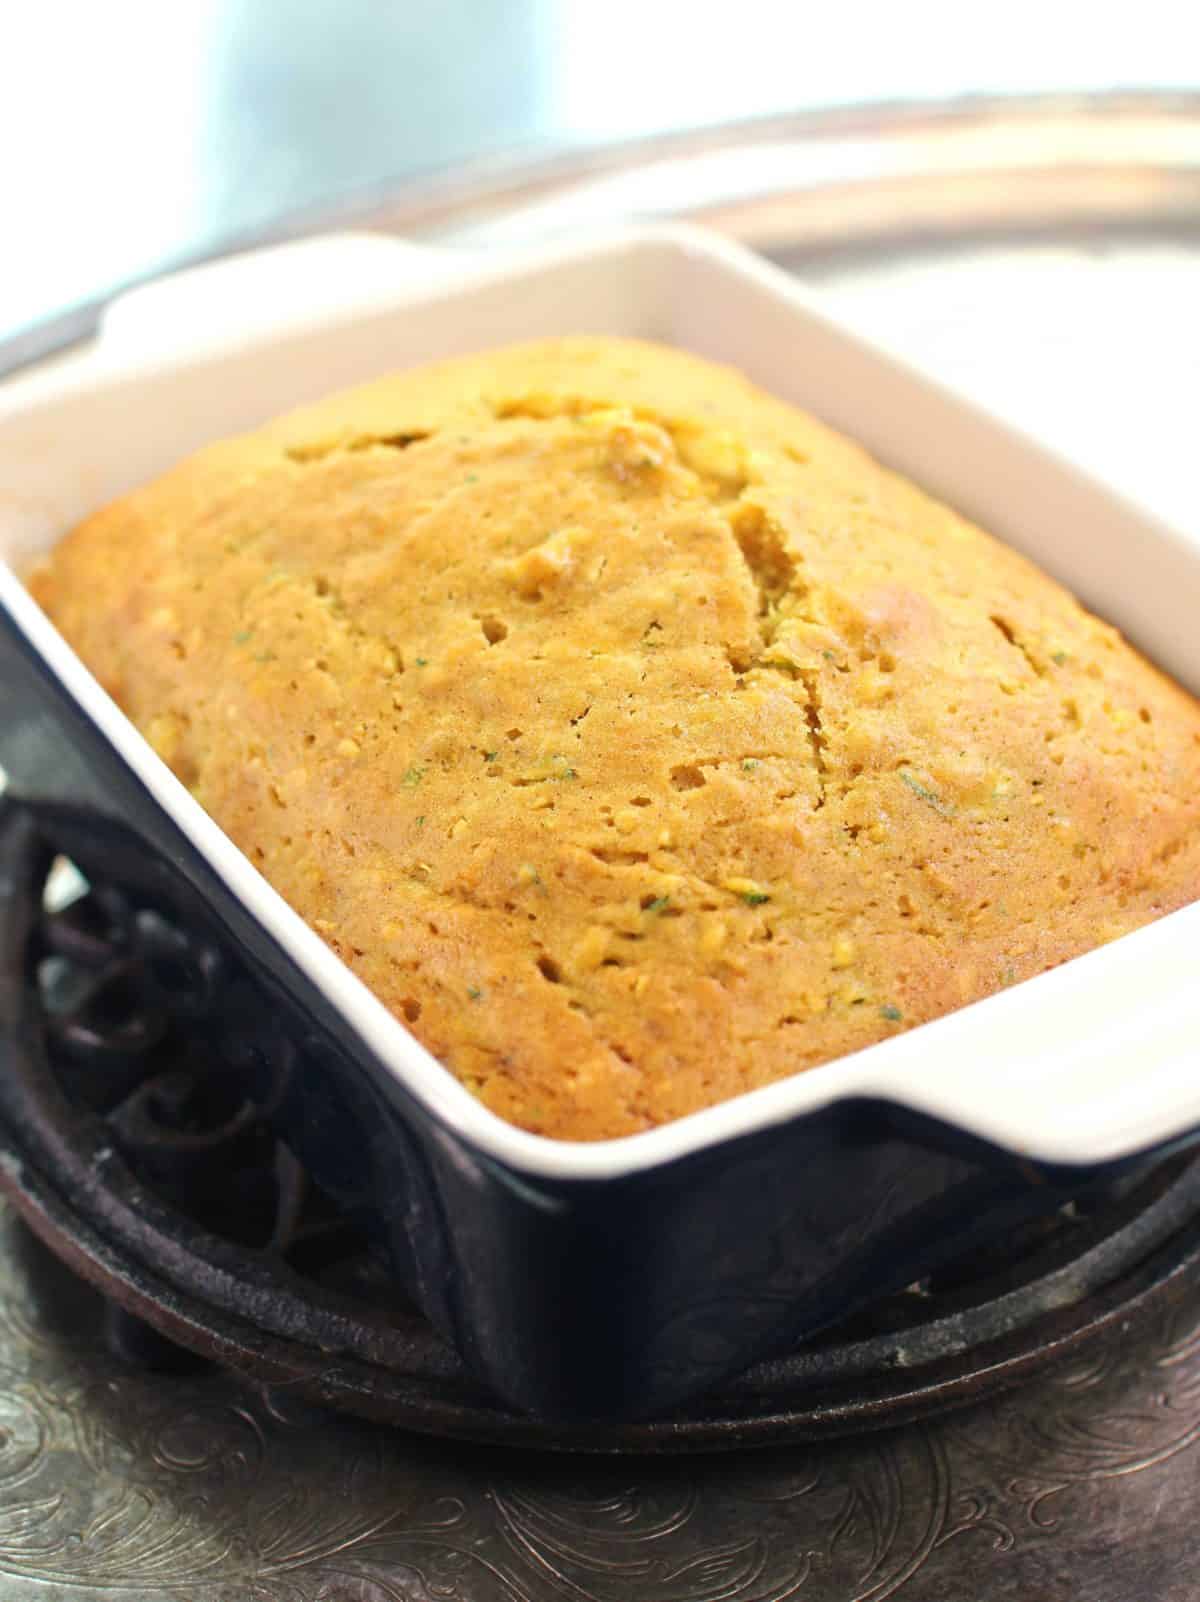 a loaf of zucchini bread baked in a rectangular blue baking dish on a metal trivet.